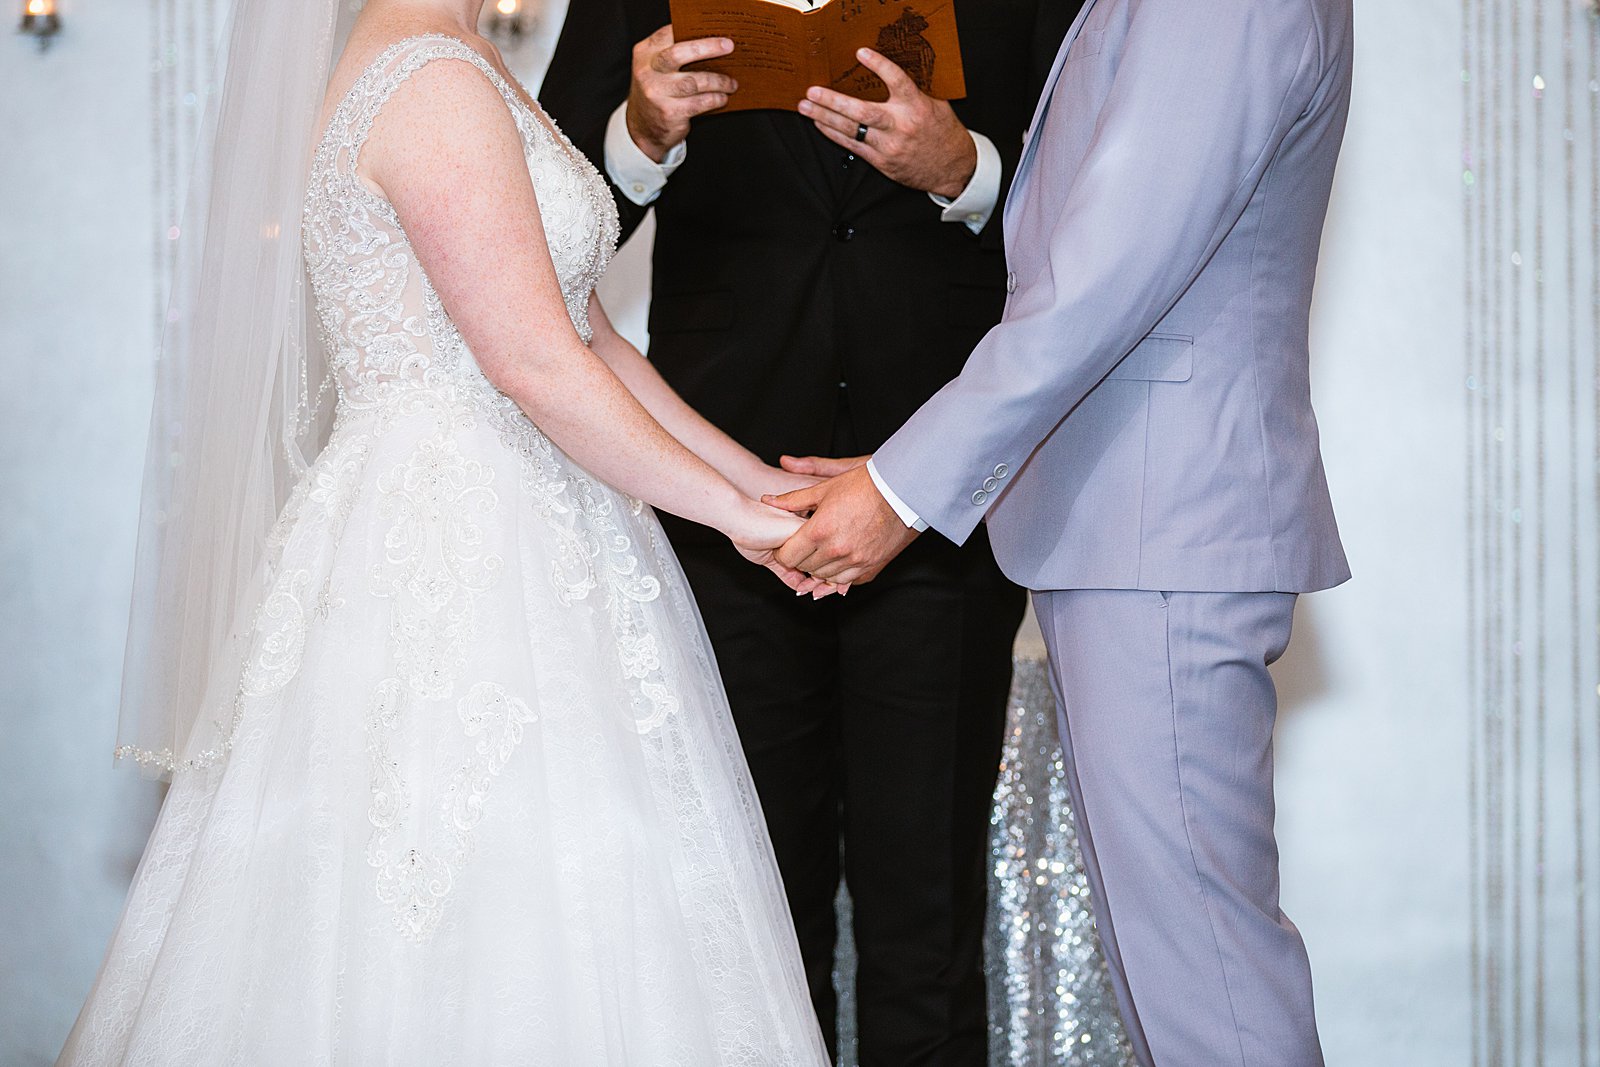 Bride and Groom holding hands during their wedding ceremony at SoHo63 by Phoenix wedding photographer PMA Photography.